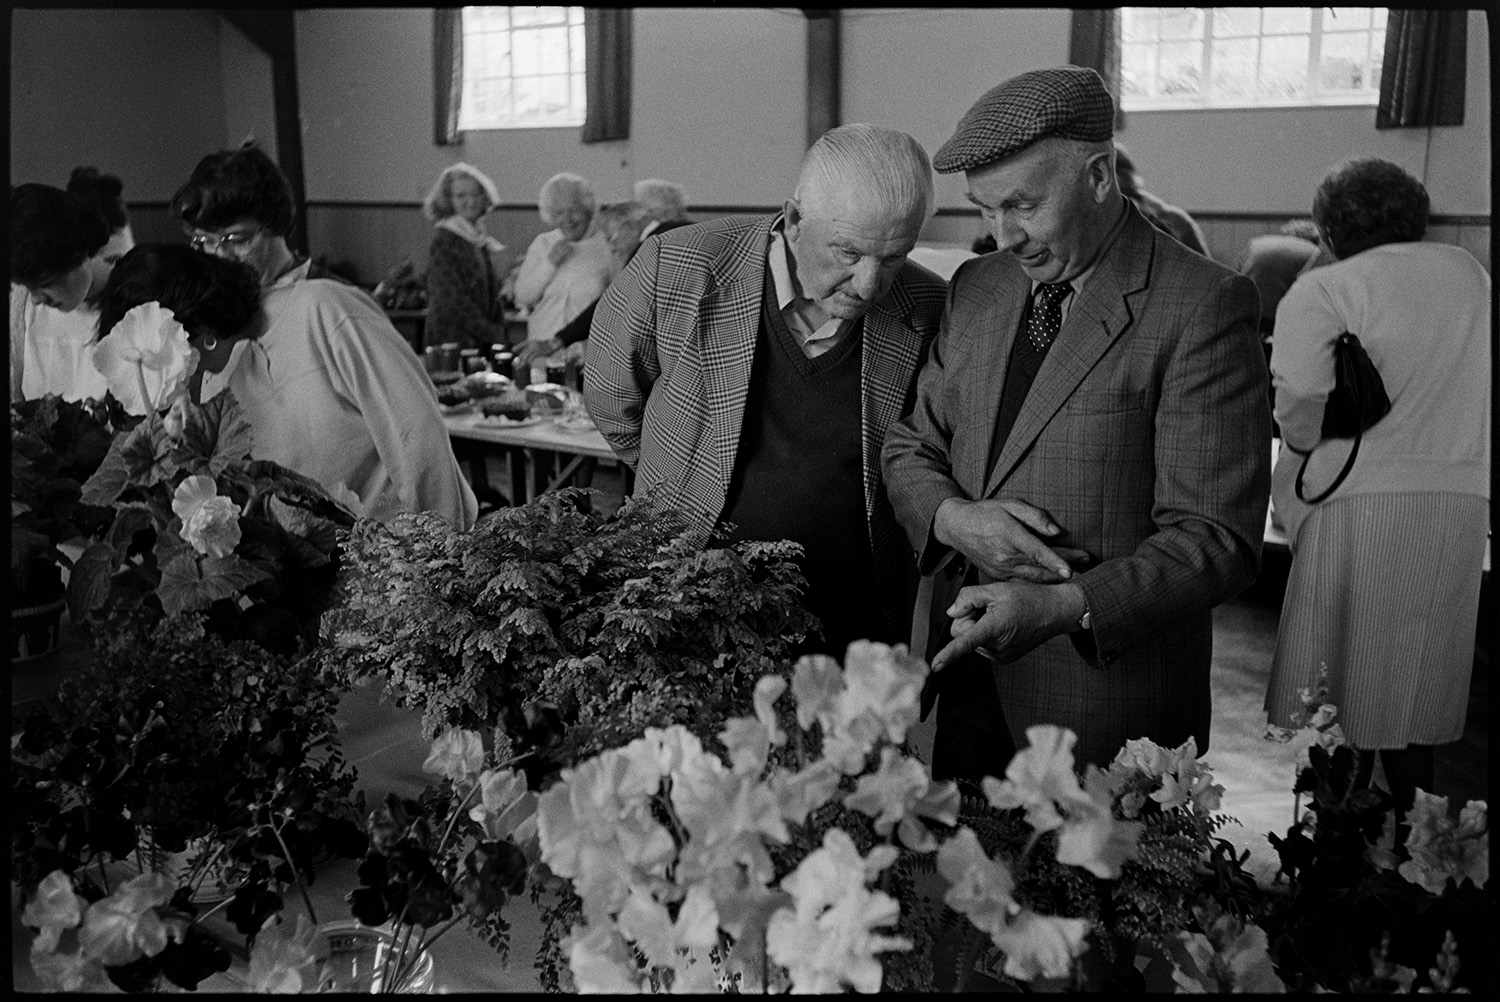 Flower show exhibits, village hall, flowers, jam, vegetables, prize winner with cup.
[Two men looking at the floral exhibits at the Dolton Flower Show in Dolton Village Hall. A cake stall, along with other visitors, is visible in the background.]